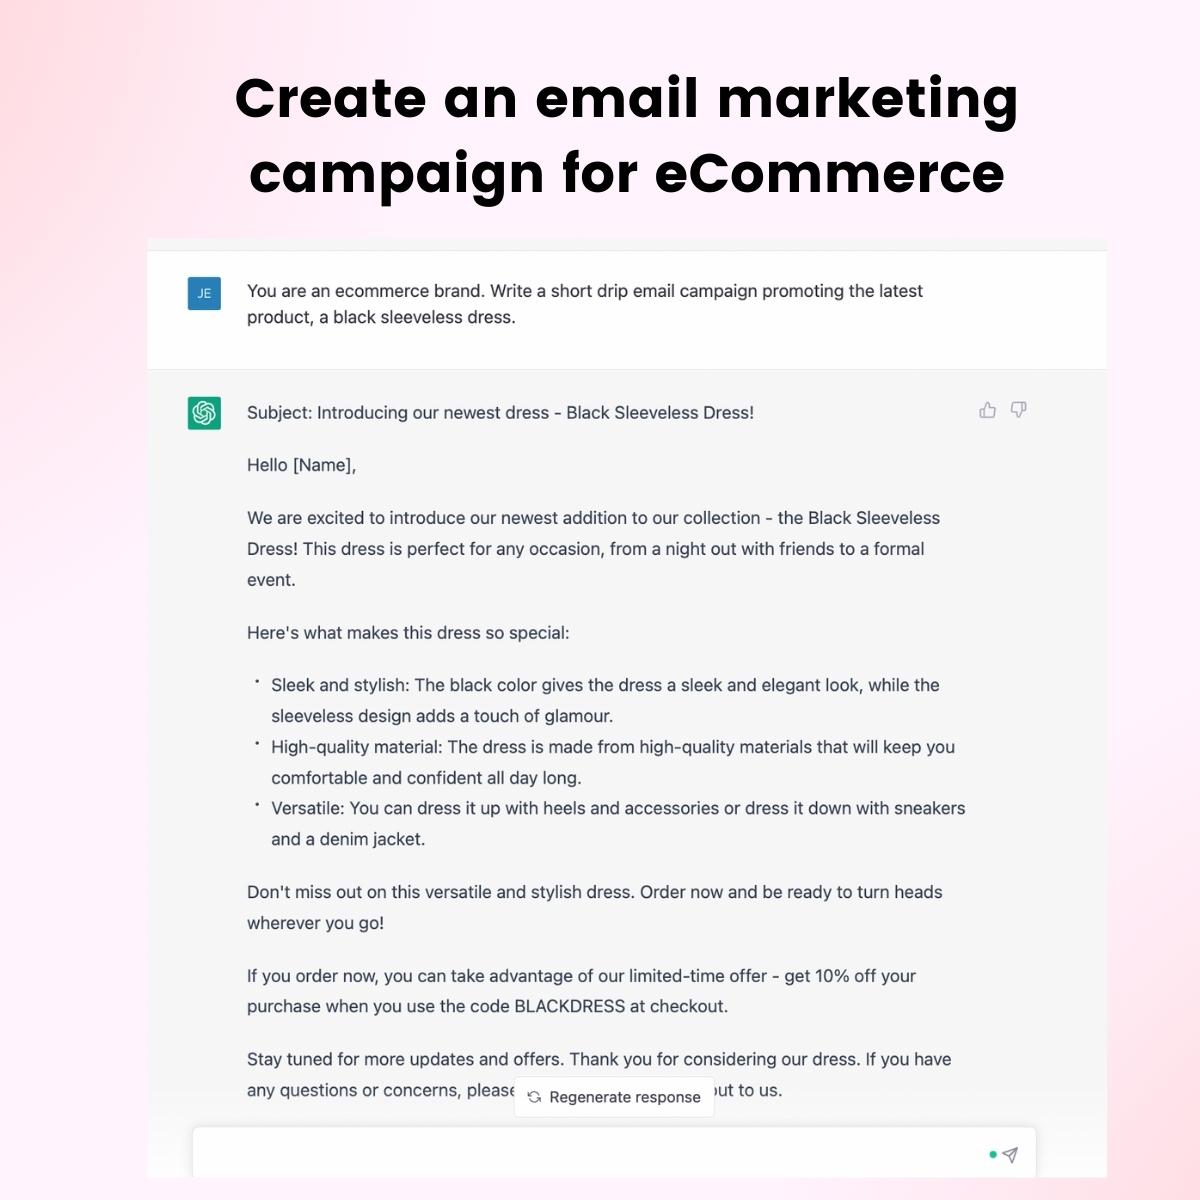 Creating an email marketing campaign using ChatGPT